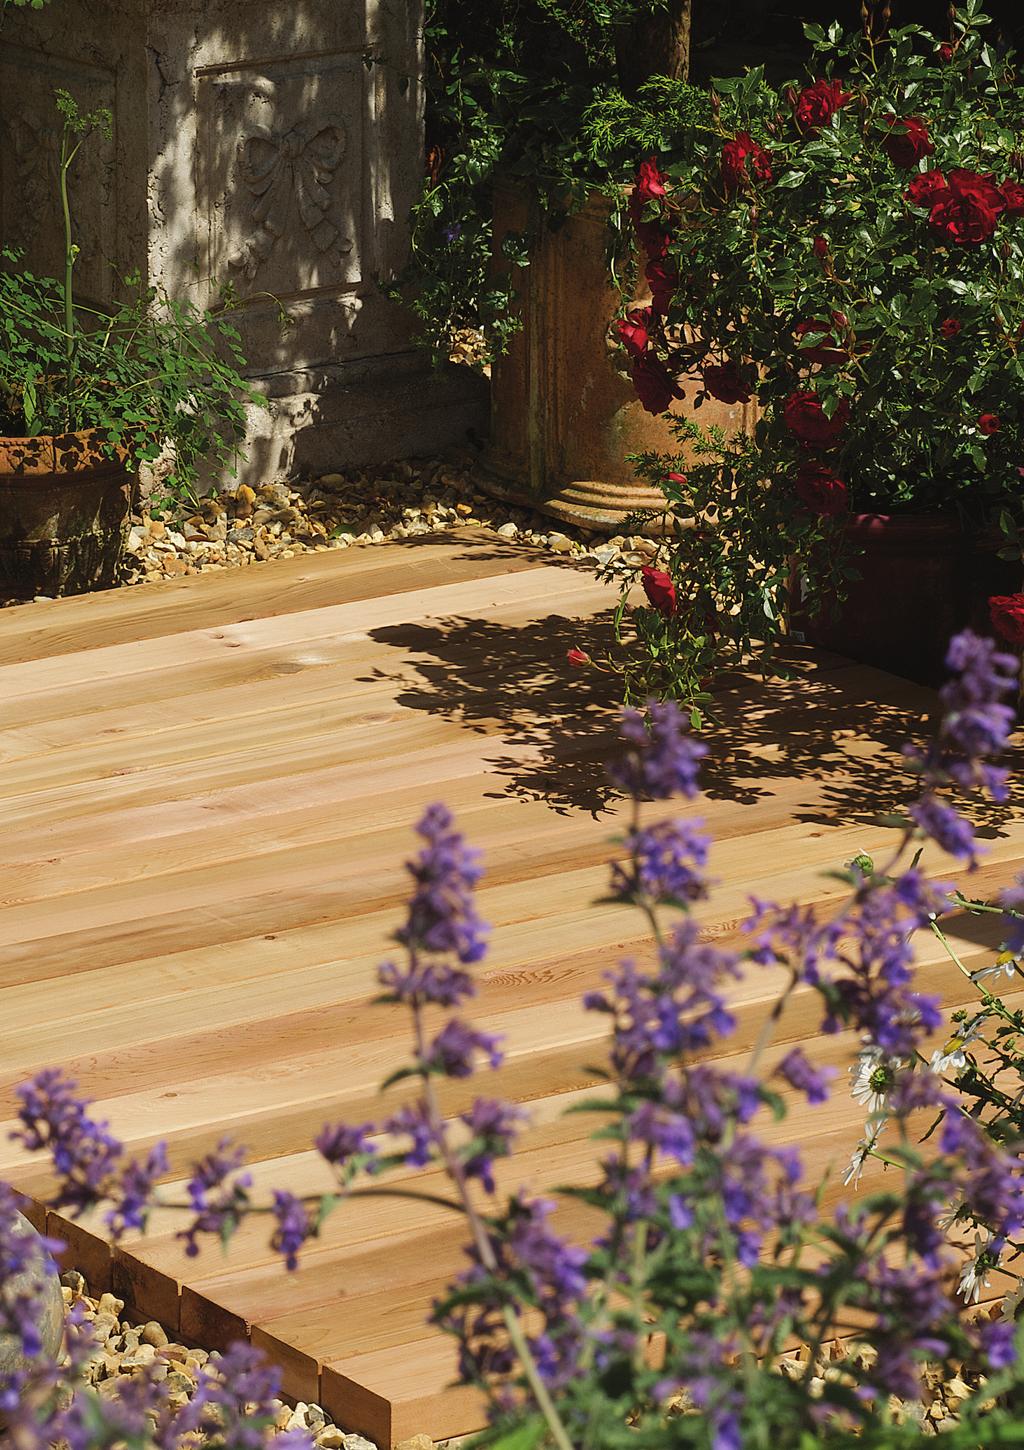 Not all decking is created equally.